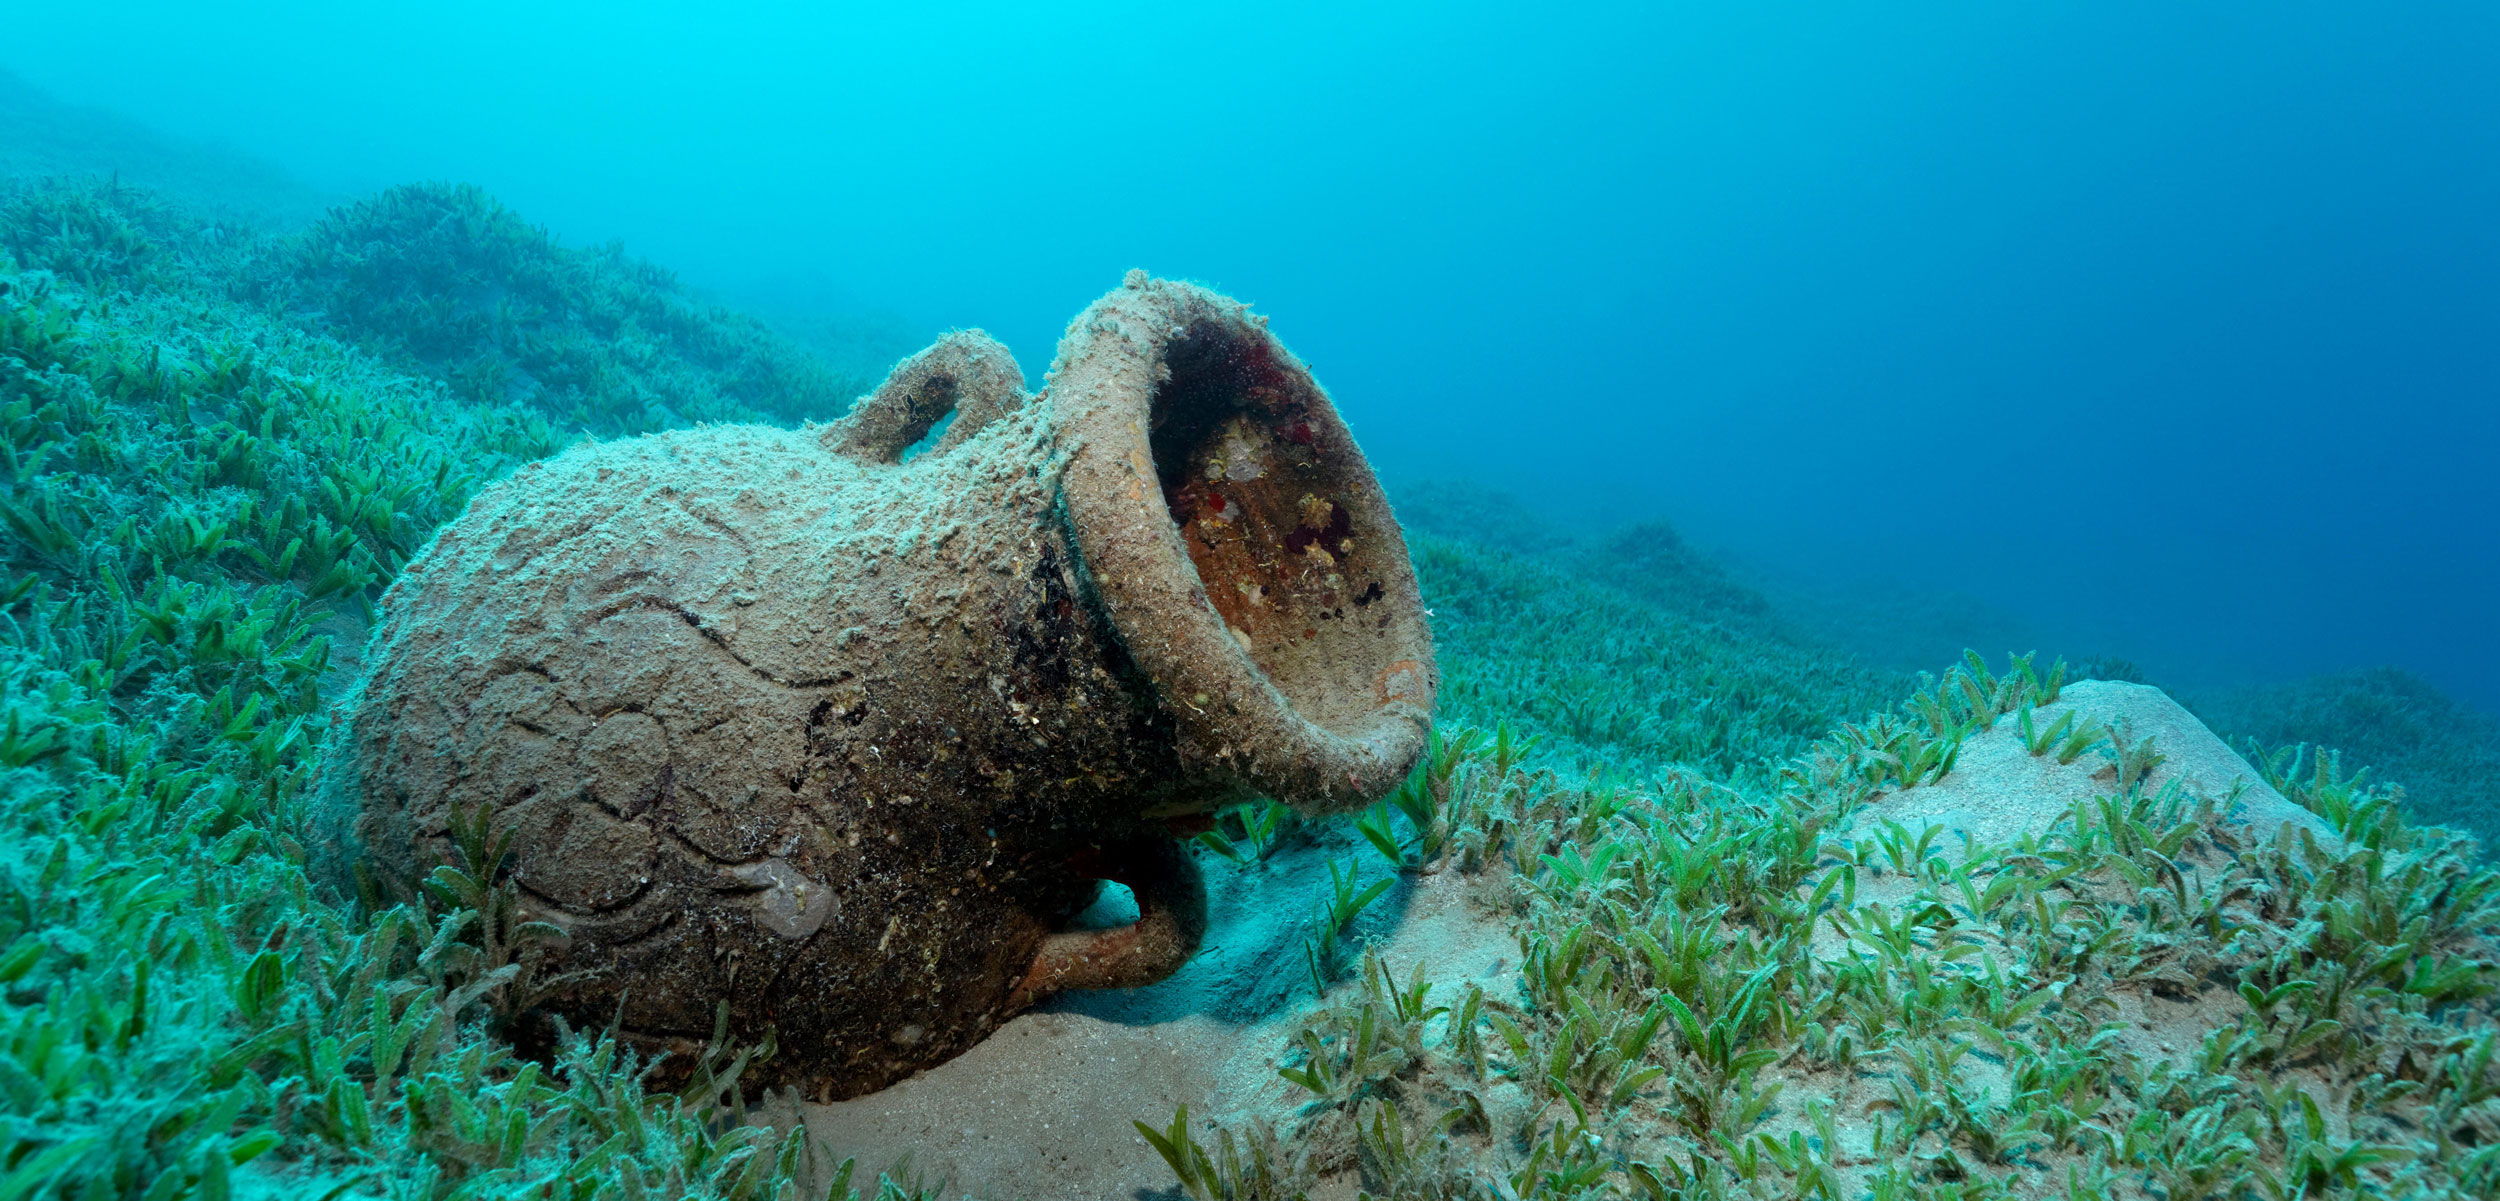 Seagrass meadows can form a protective blanket over underwater archaeological sites, helping preserve artifacts such as this amphora found in the Red Sea near Hurghada, Egypt. Photo by Imagebroker/Alamy Stock Photo